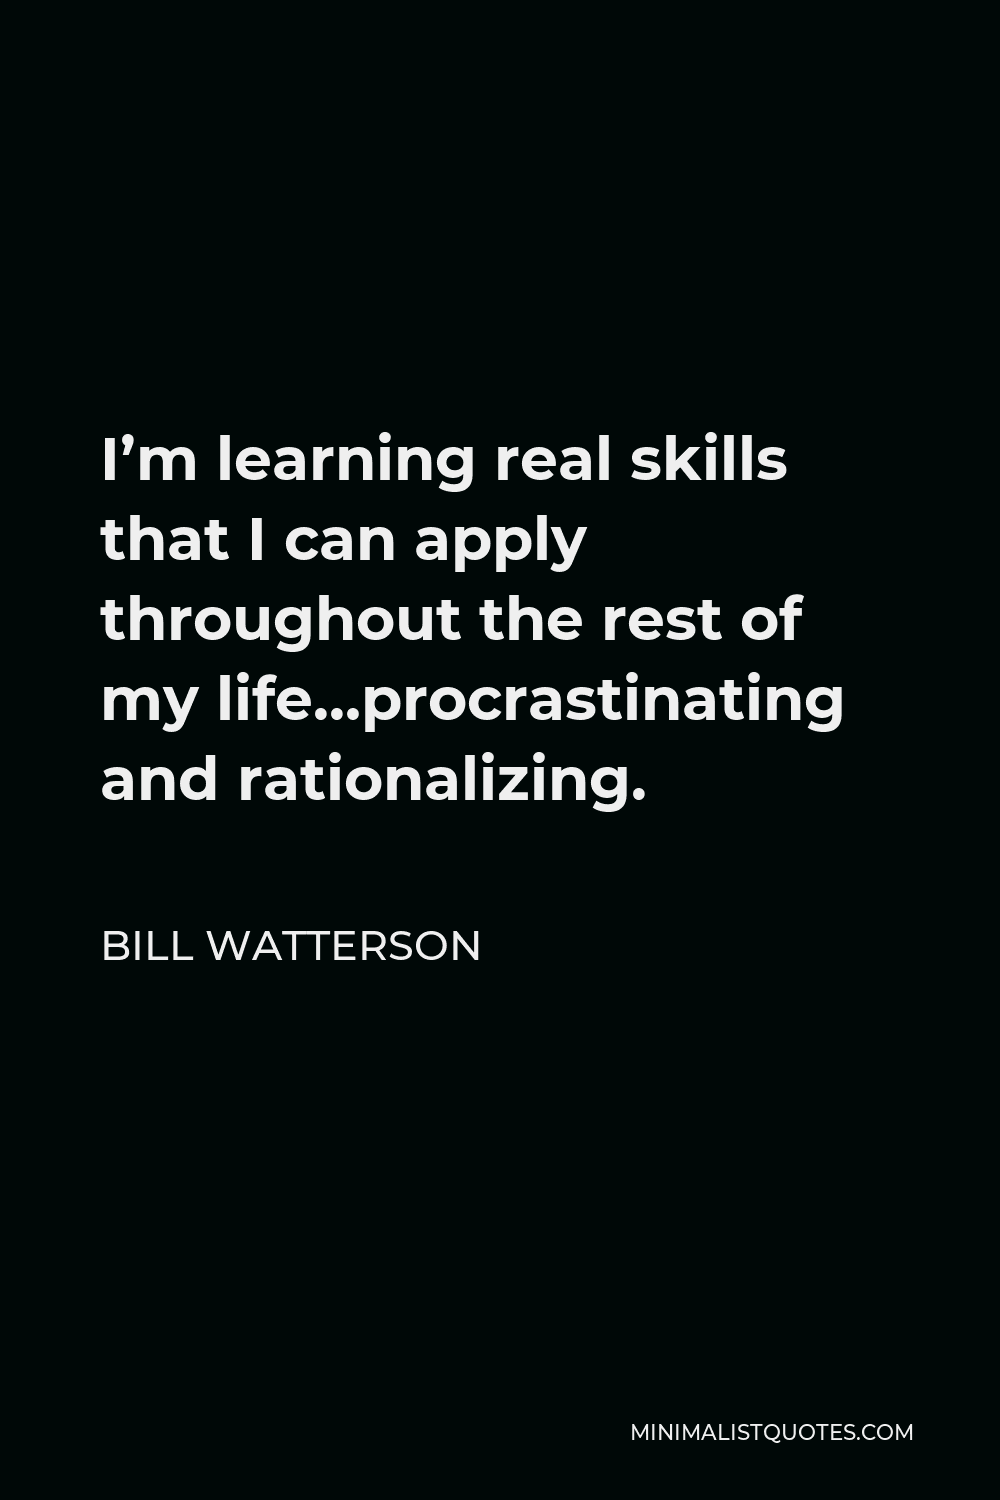 Bill Watterson Quote - I’m learning real skills that I can apply throughout the rest of my life…procrastinating and rationalizing.